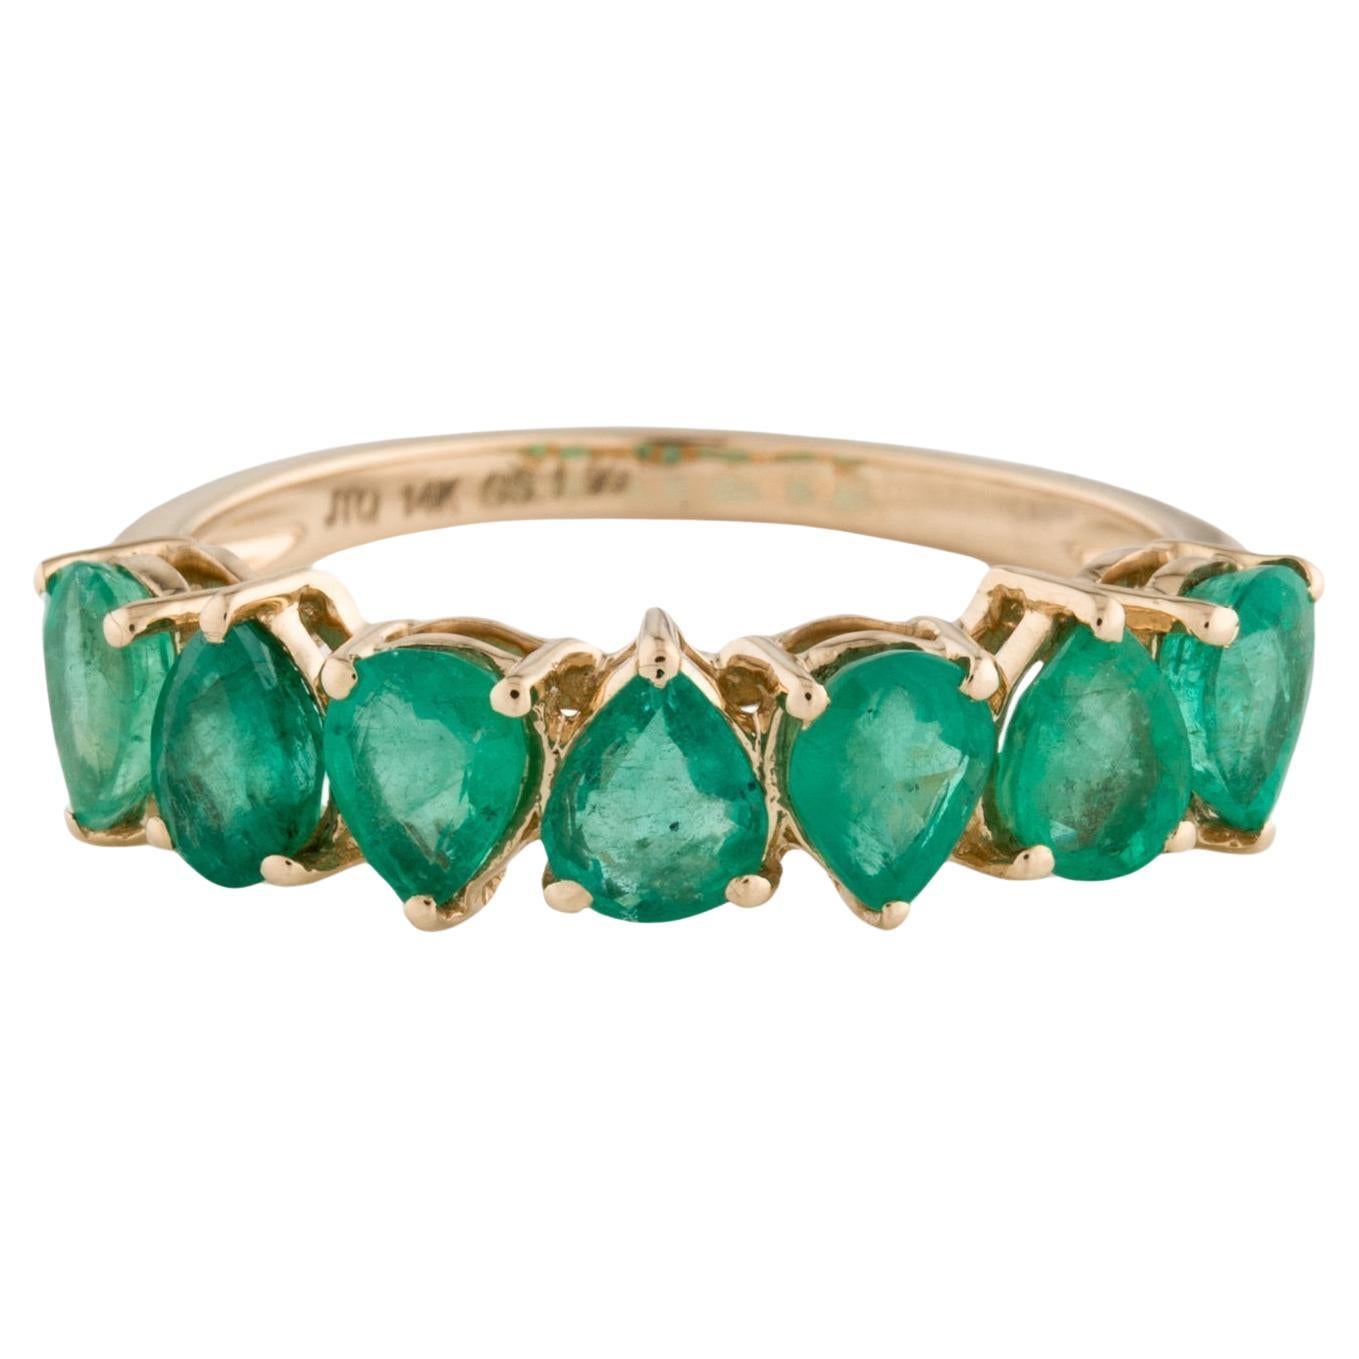 Exquisite 14K Gold 1.68ctw Emerald Band Ring - Size 7.75 - Fine Gemstone Jewelry For Sale